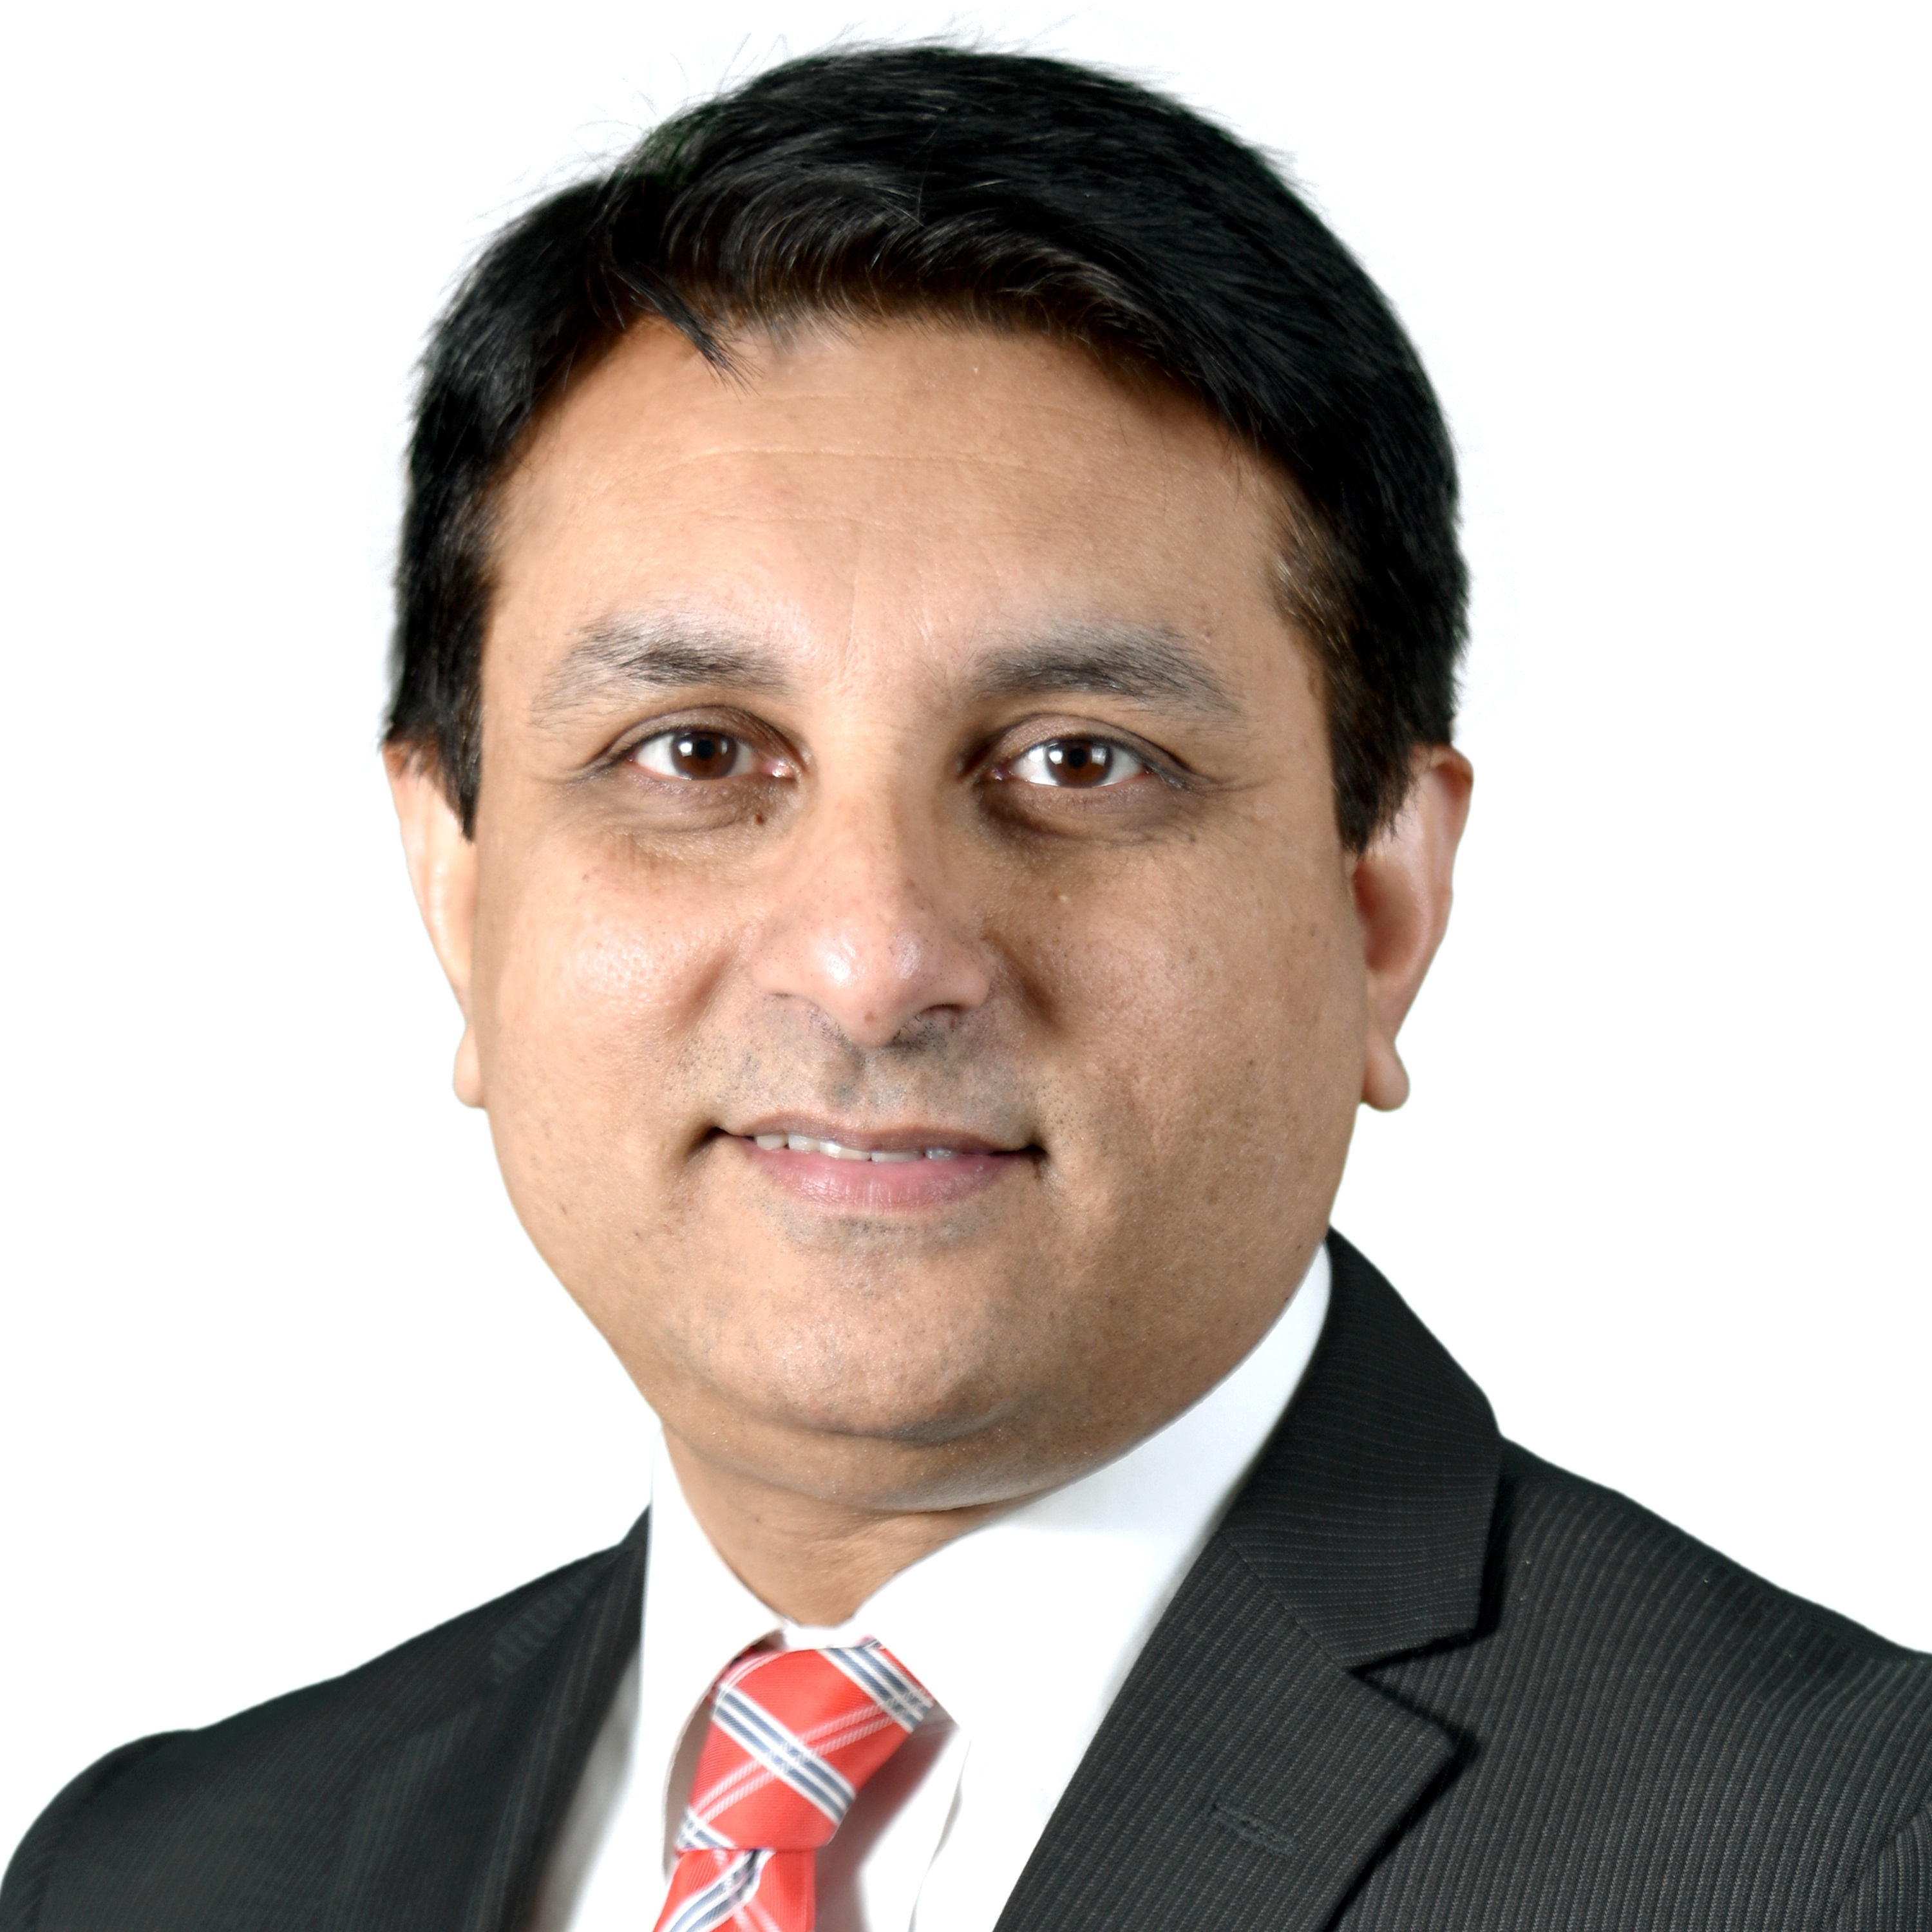 Farrukh Hasan, Executive Vice President of Process Automation, Siemens Middle East